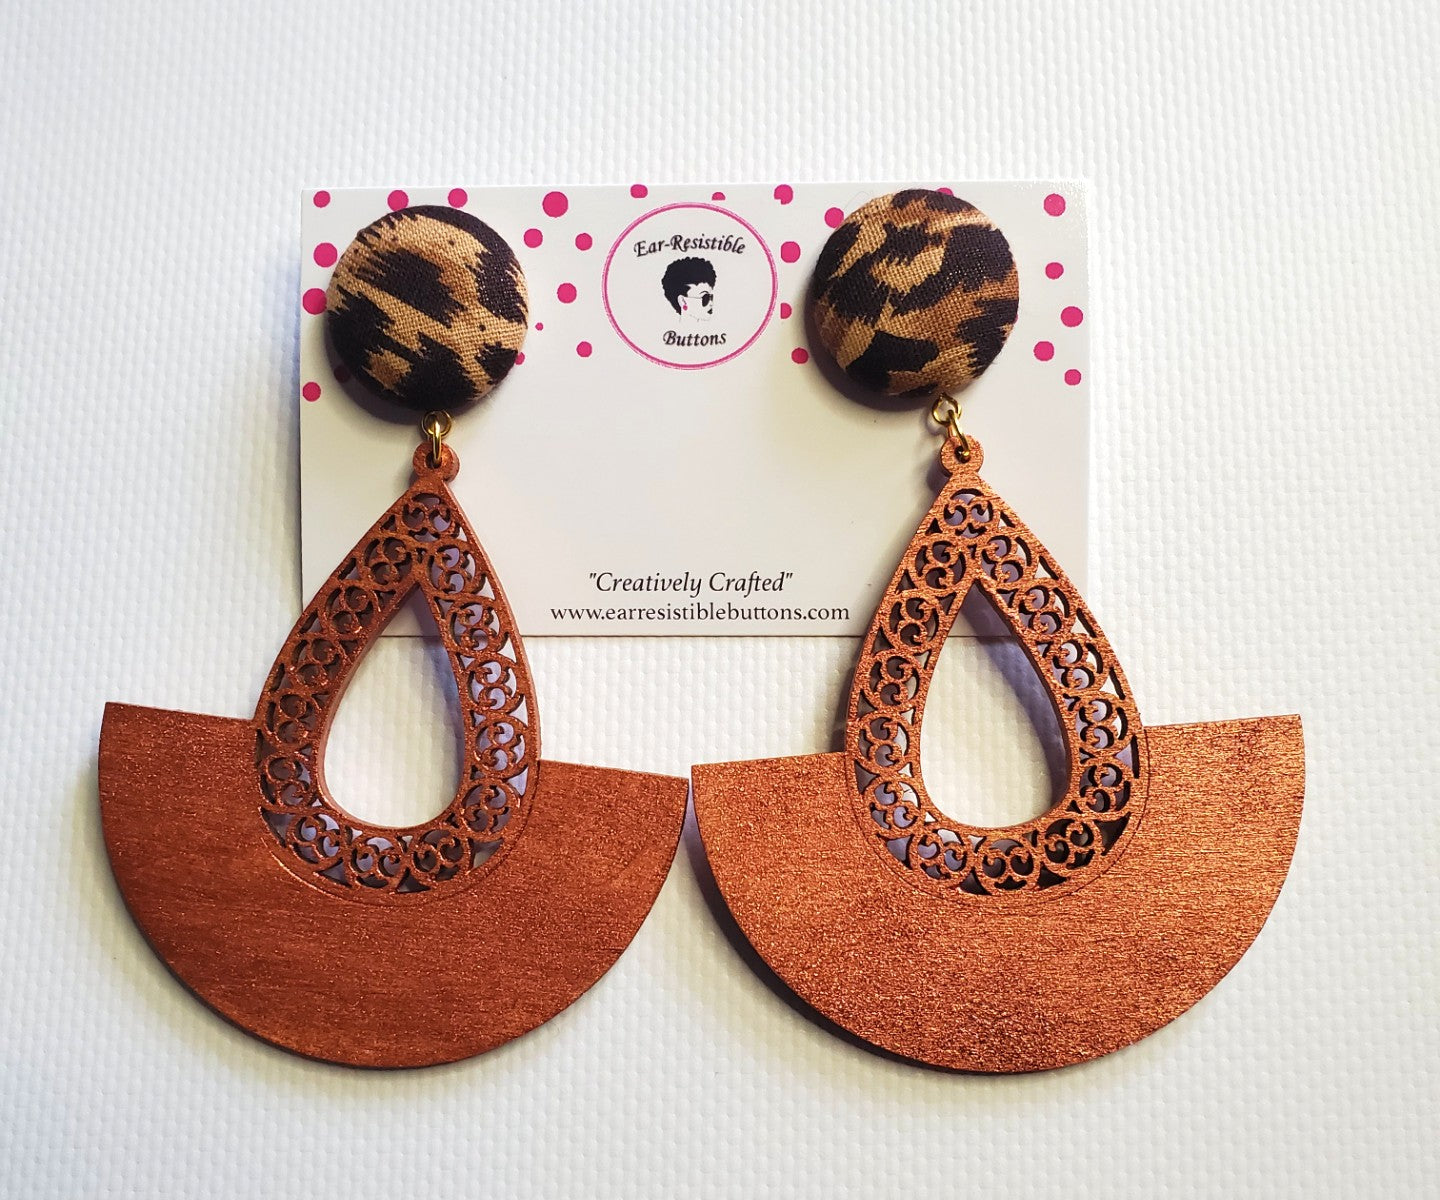 cheetah print button stud earring with attached copper colored wooden accessory